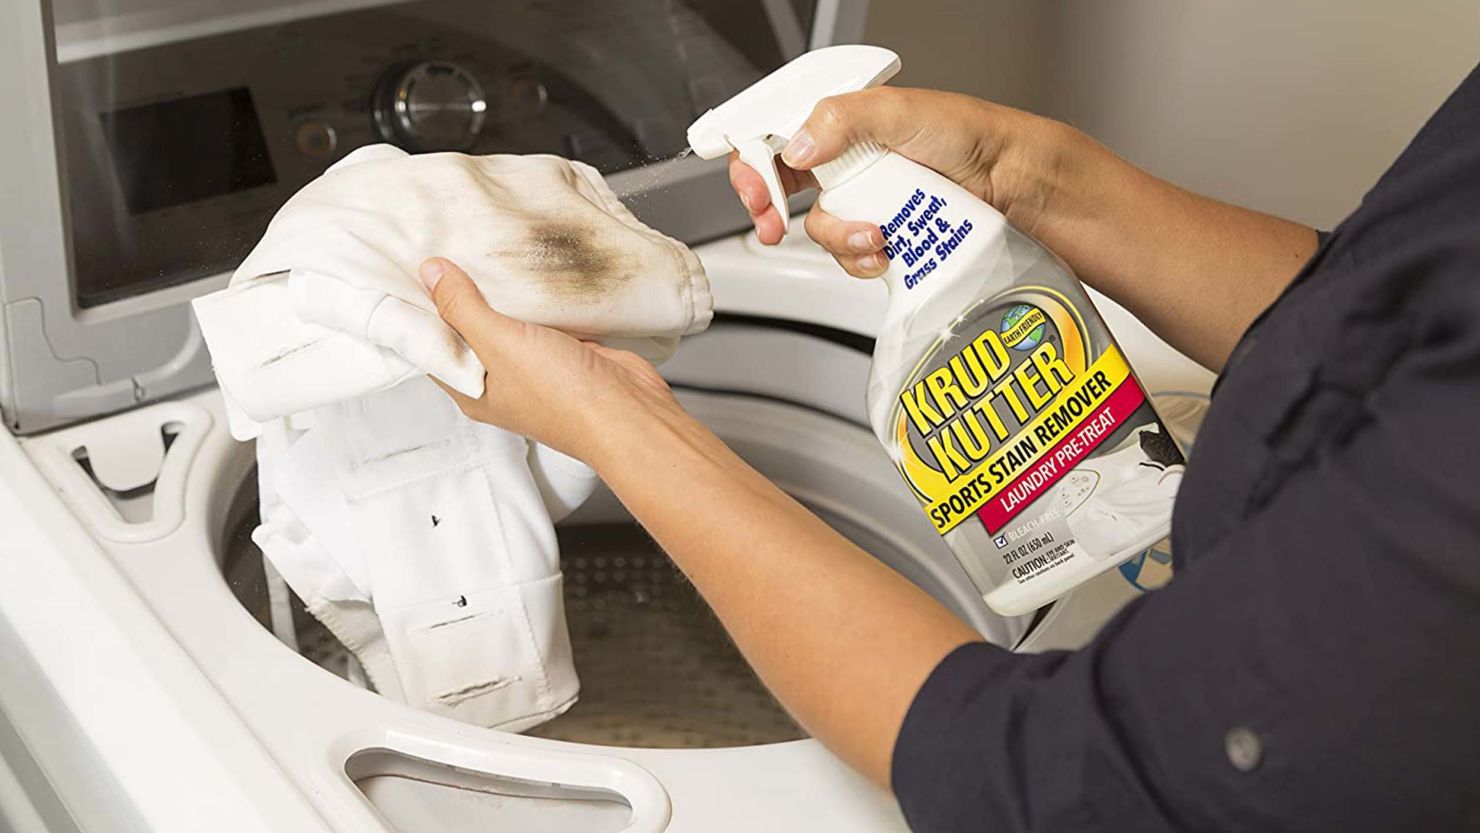 Sports Stain Remover Laundry Pre-Treat